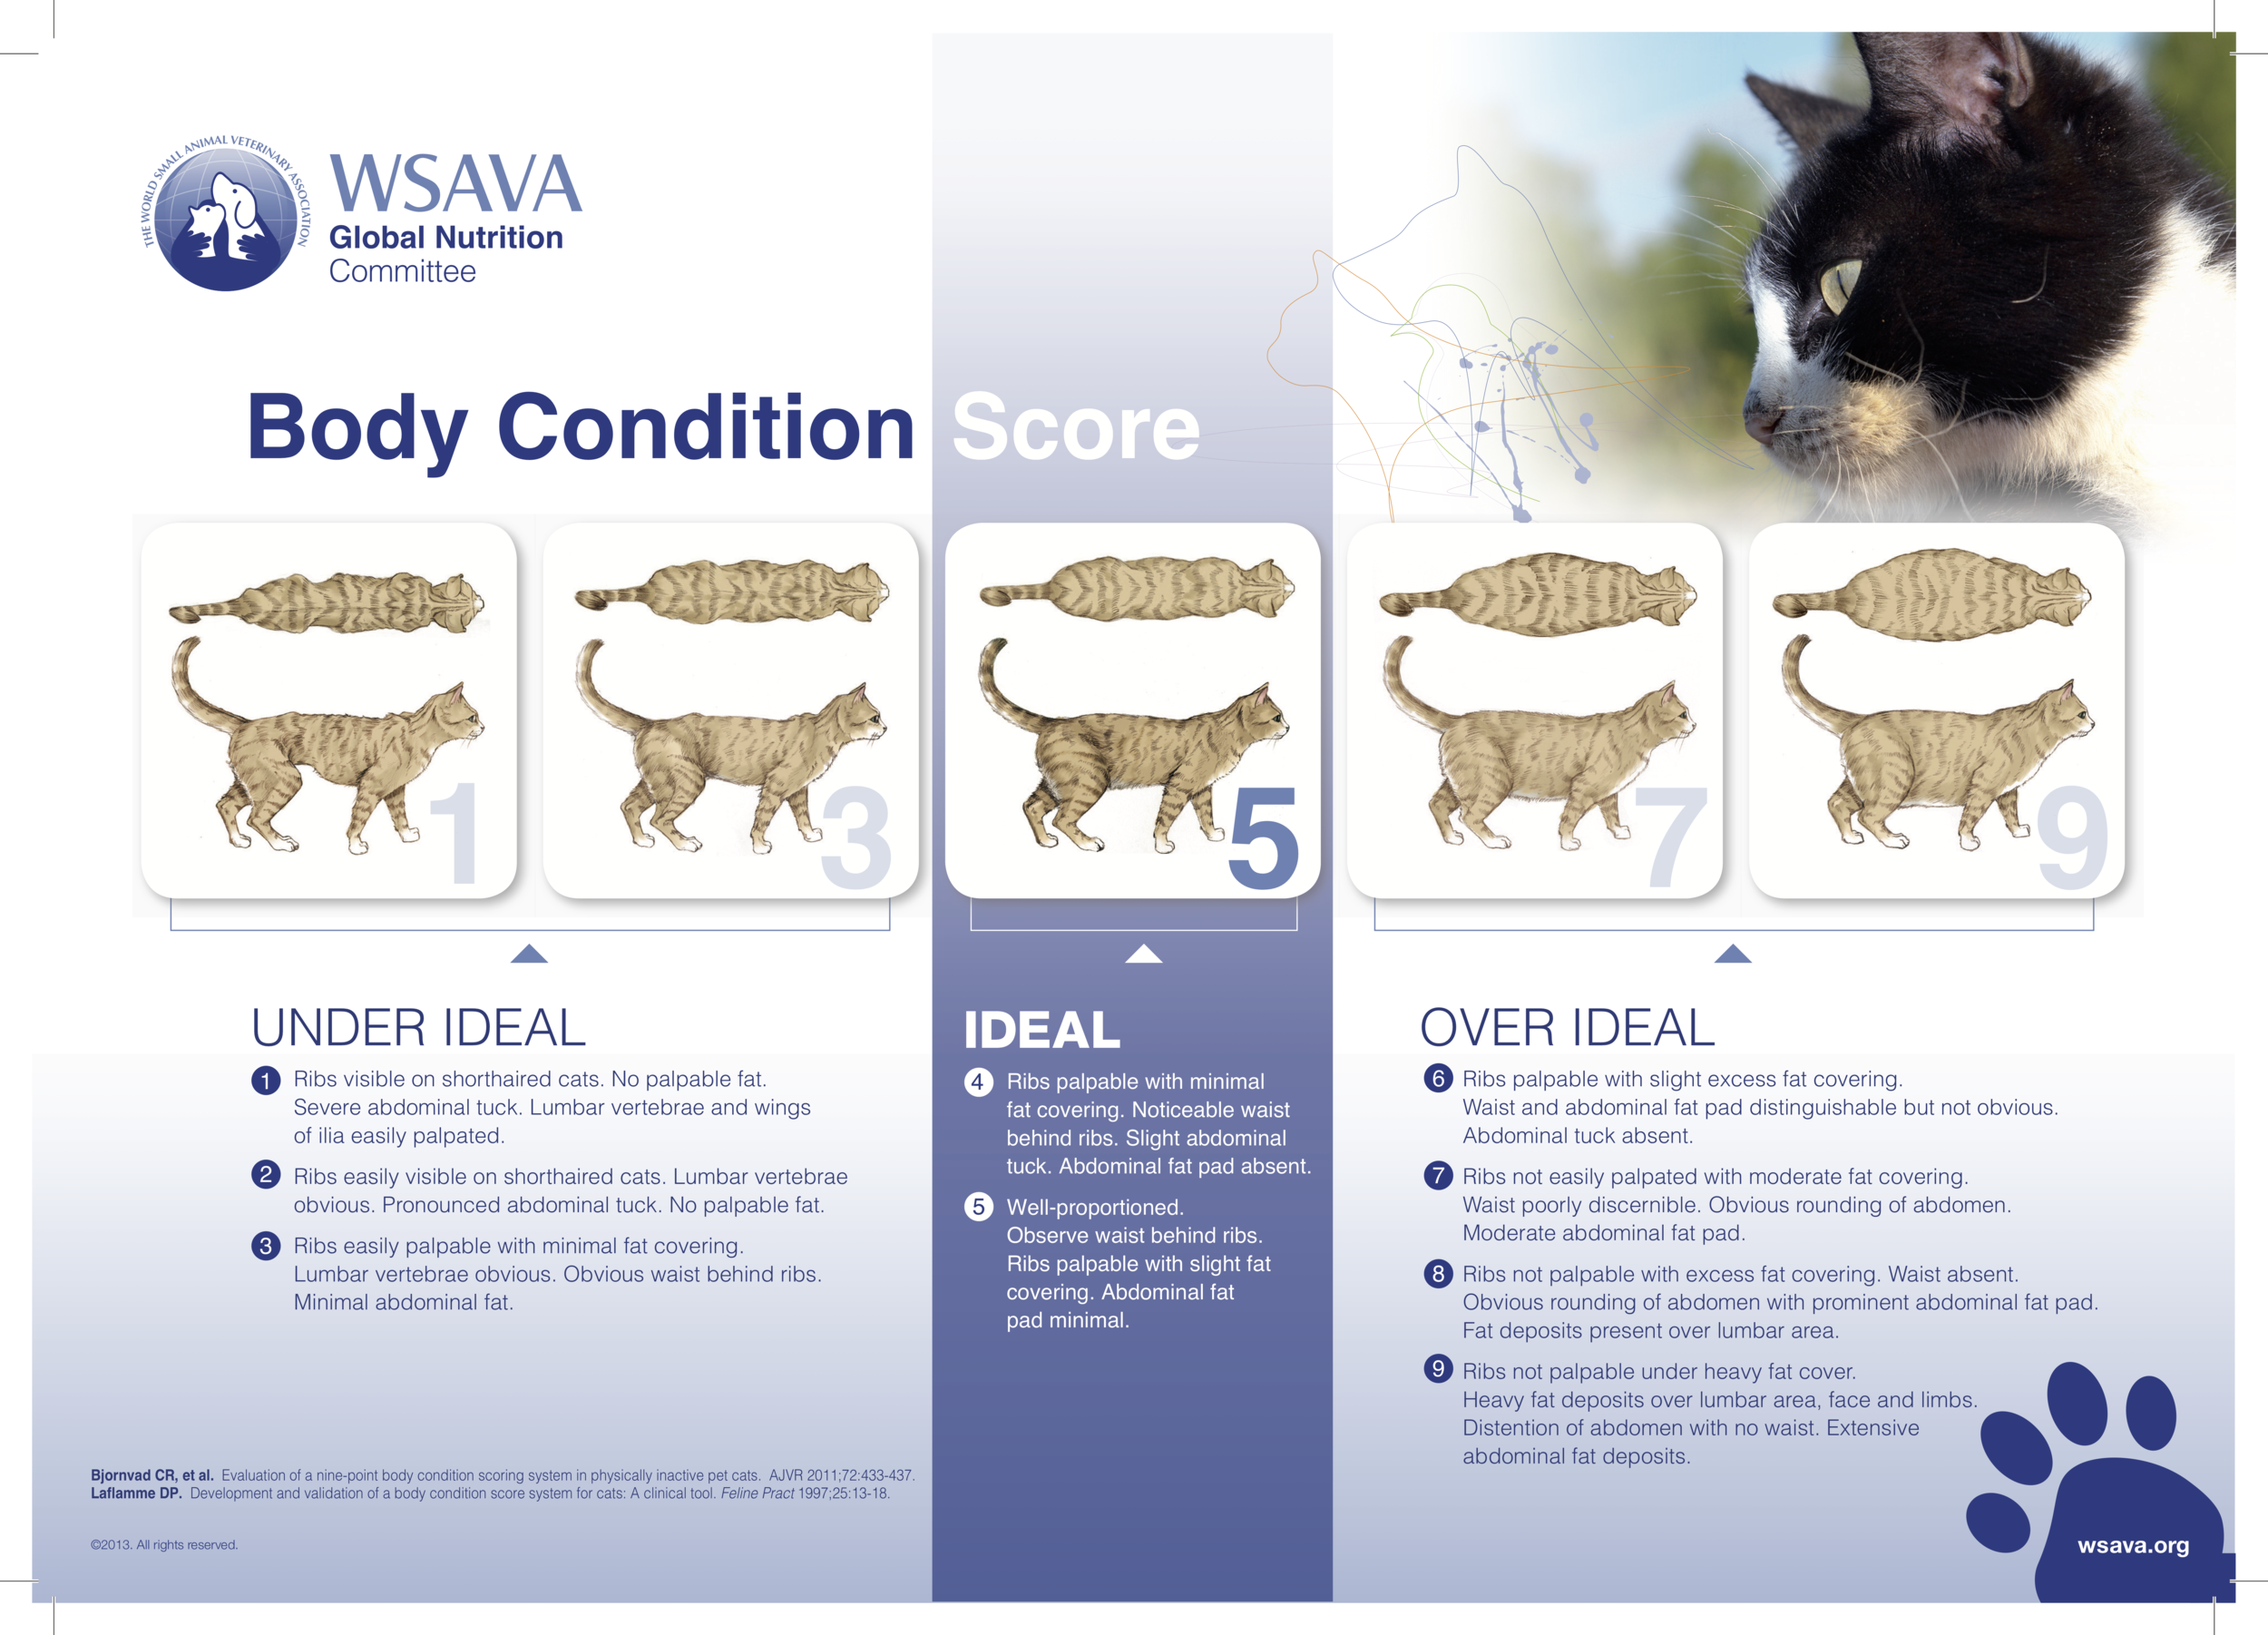 Is my cat overweight? 5 Ways to make sure your cat is a healthy weight